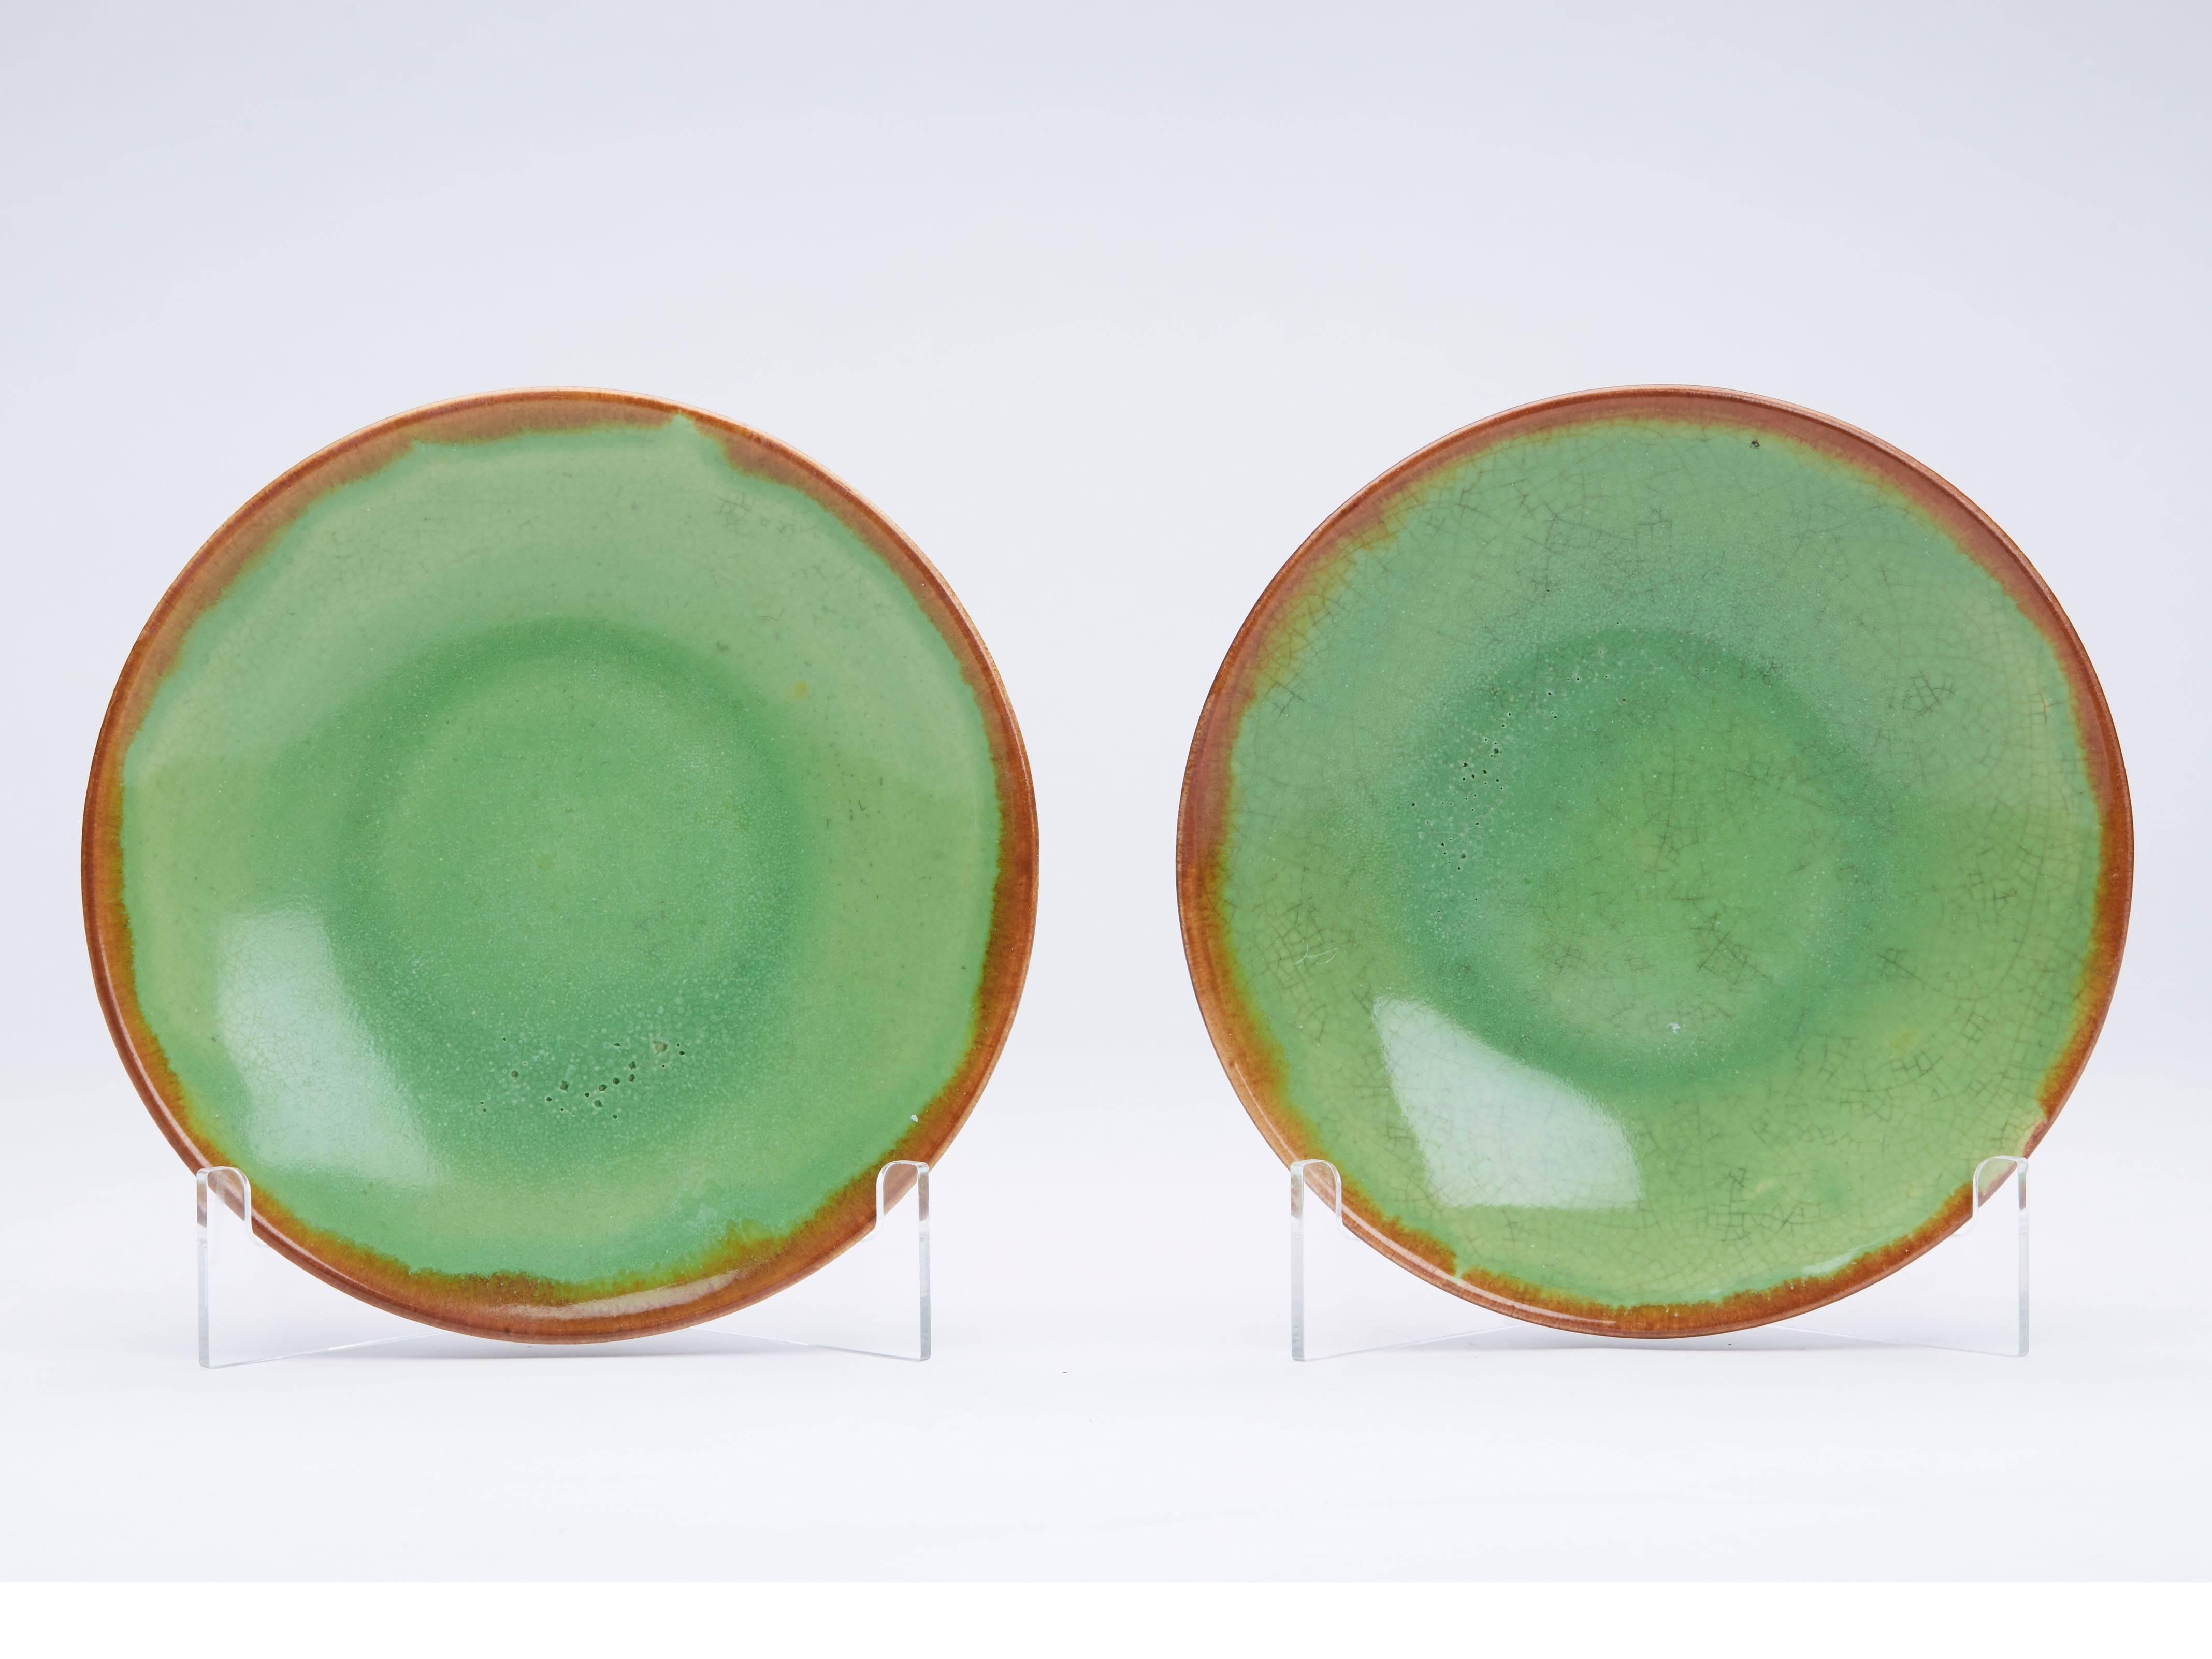 A stylish French Greber art pottery set of seven stoneware plates decorated in green glazes with mottled brown glazes applied to the underside of the rim and flowed over the top. Made in Beauvais and probably by Charles Greber (1853-1935) the plates